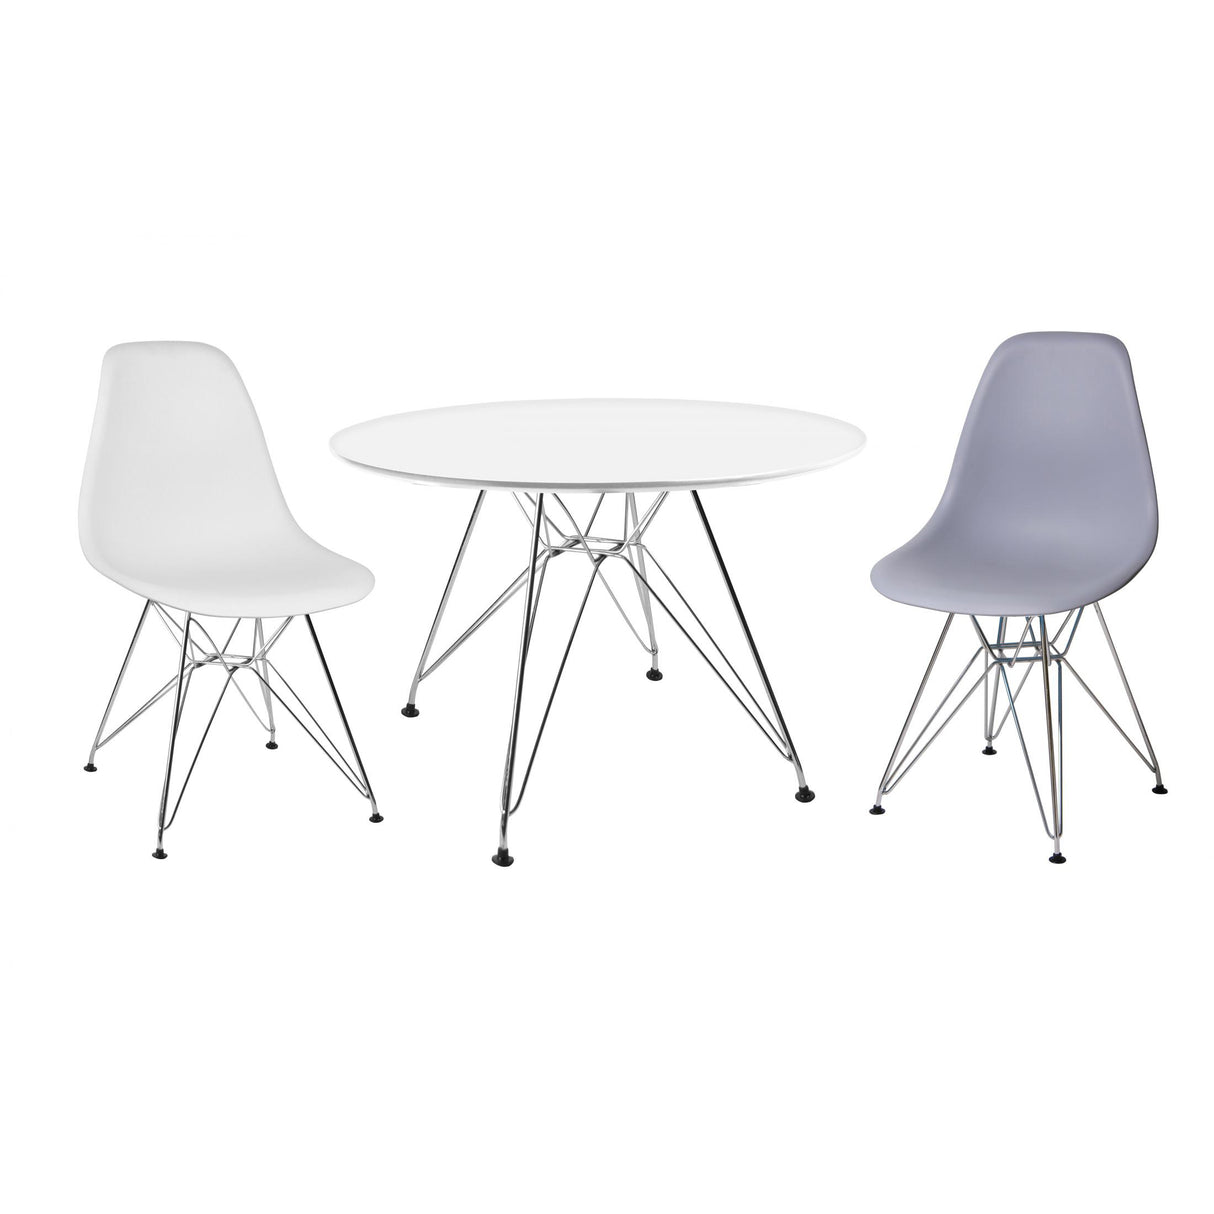 Bianca Round Dining Table High Gloss White And Steel Chrome Legs